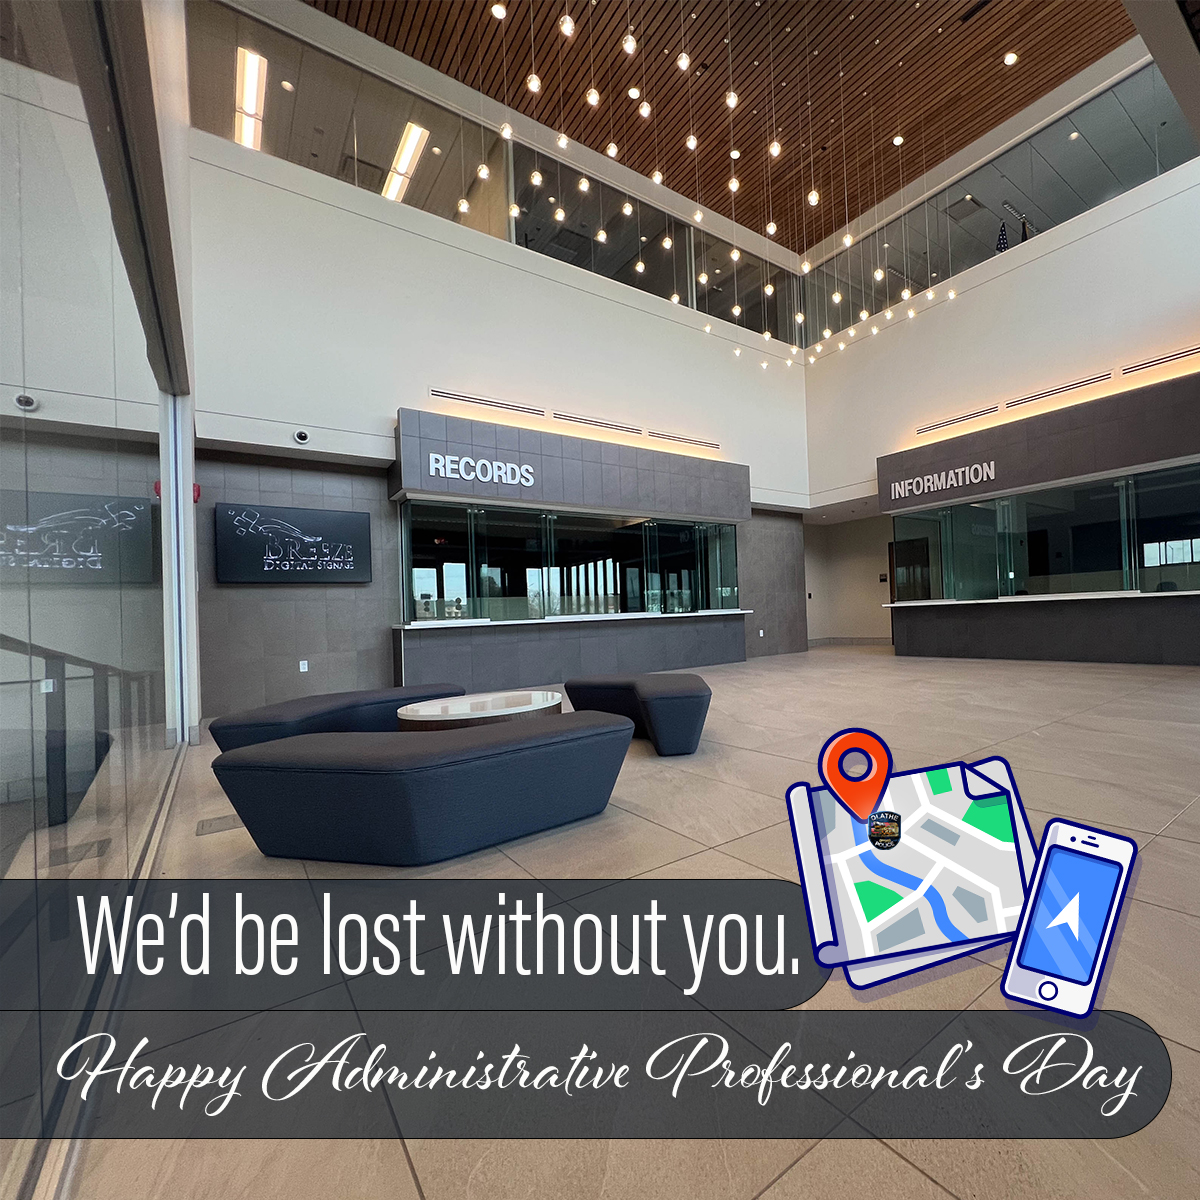 Thank you to all the Administrative Professionals, especially the outstanding ones here at OPD! #AdministrativeProfessionalsDay @CityofOlatheKS